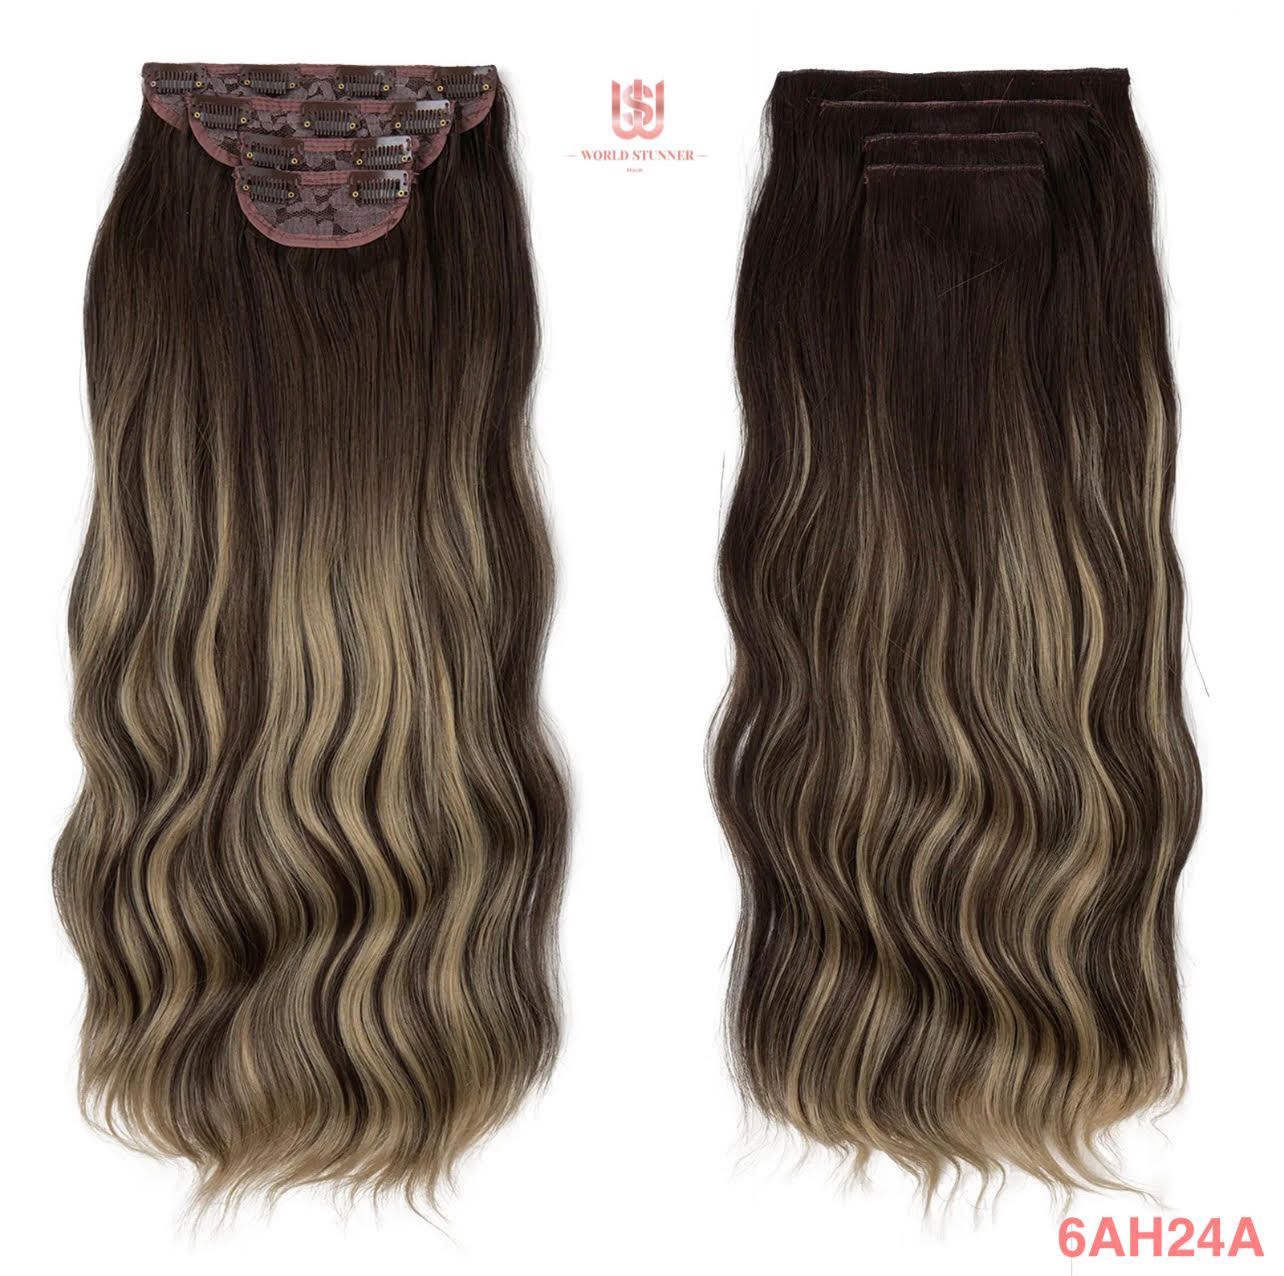 6AH24A - SUPER THICK 22” 4 PIECE WAIST Length WAVE CLIPS IN HAIR Extensions